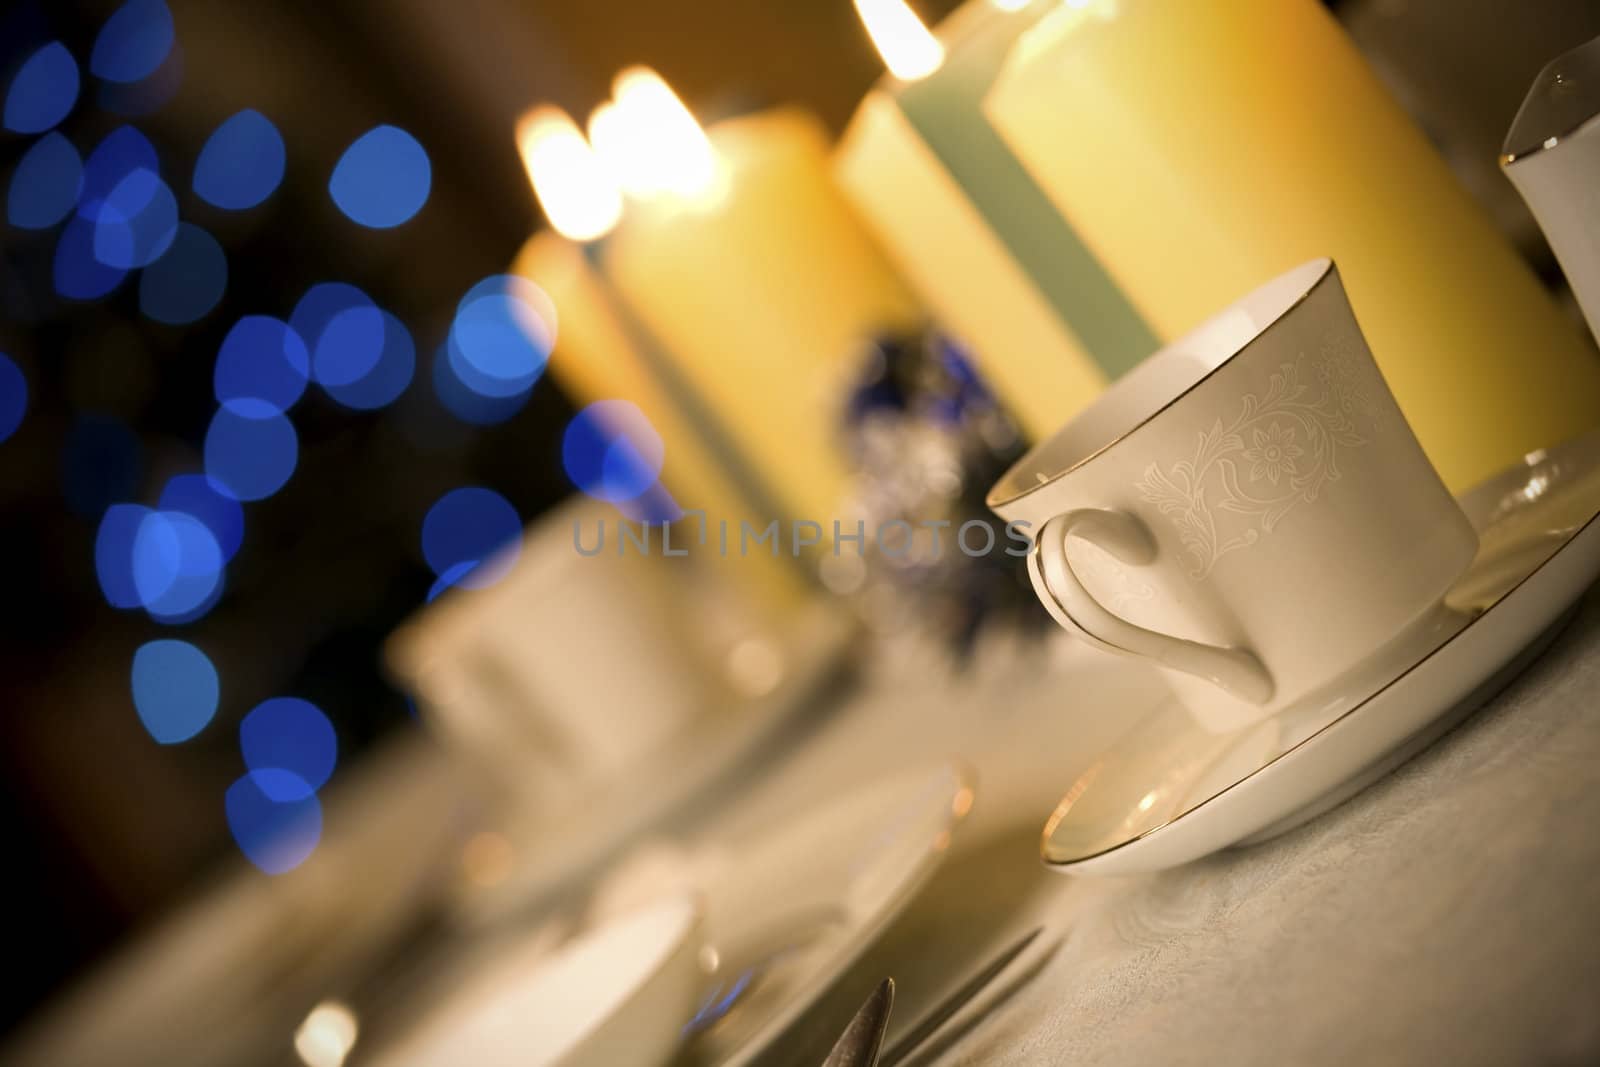 Simple but elegant Christmas table setting  by jarenwicklund